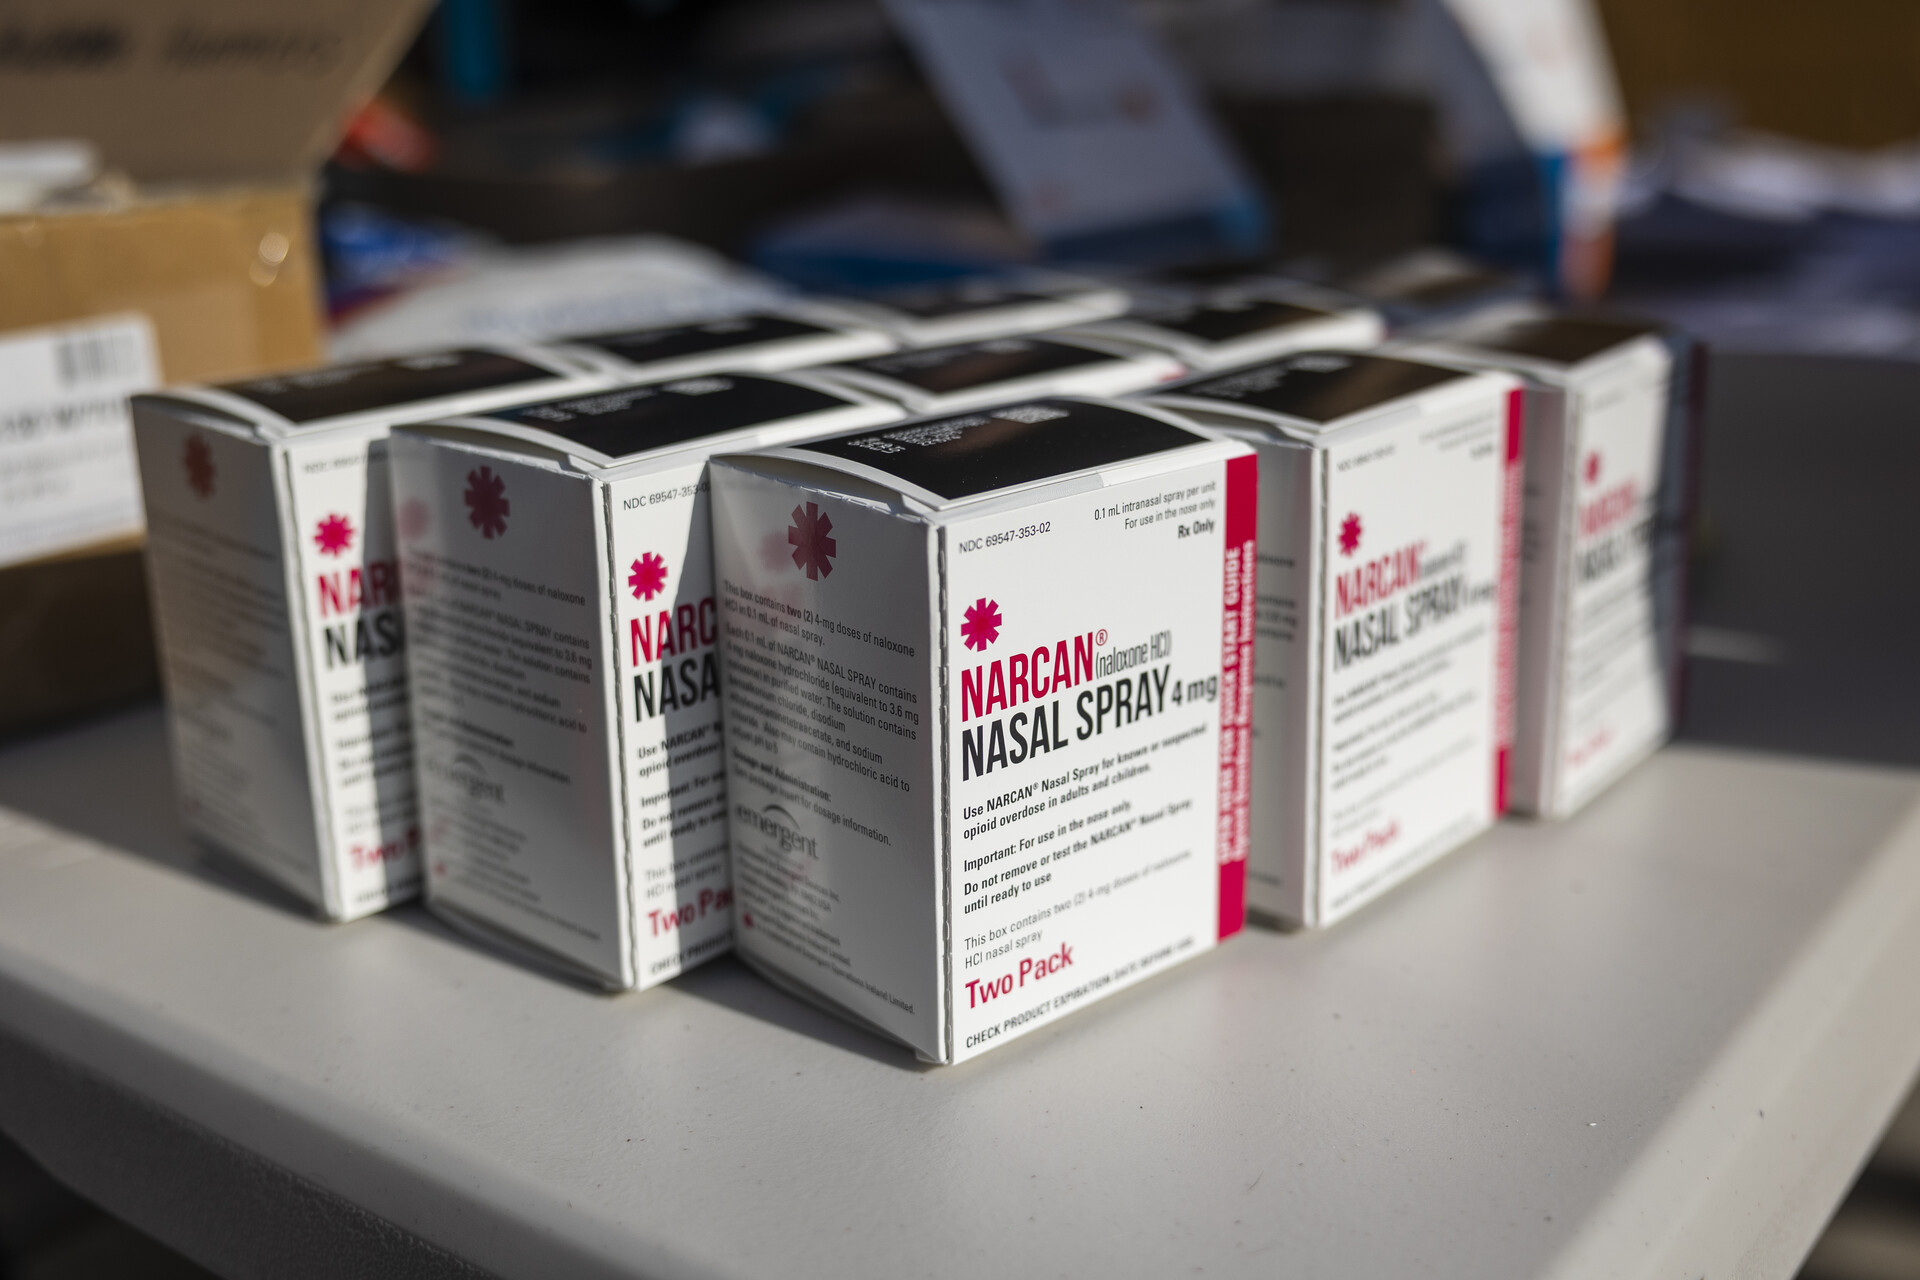 Boxes of Narcan are on a table.